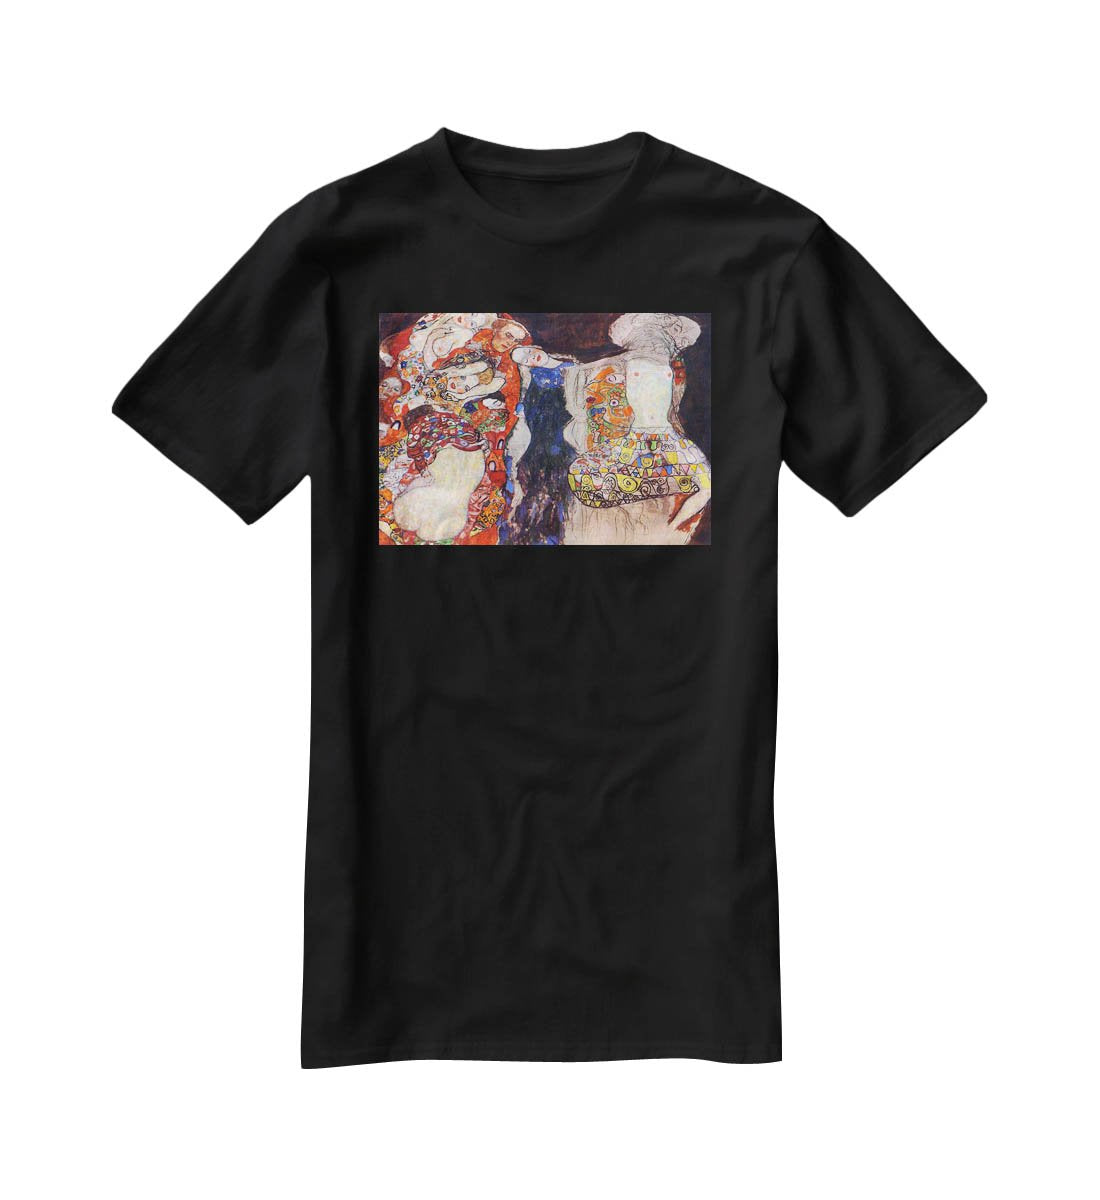 adorn the bride with veil and wreath by Klimt T-Shirt - Canvas Art Rocks - 1